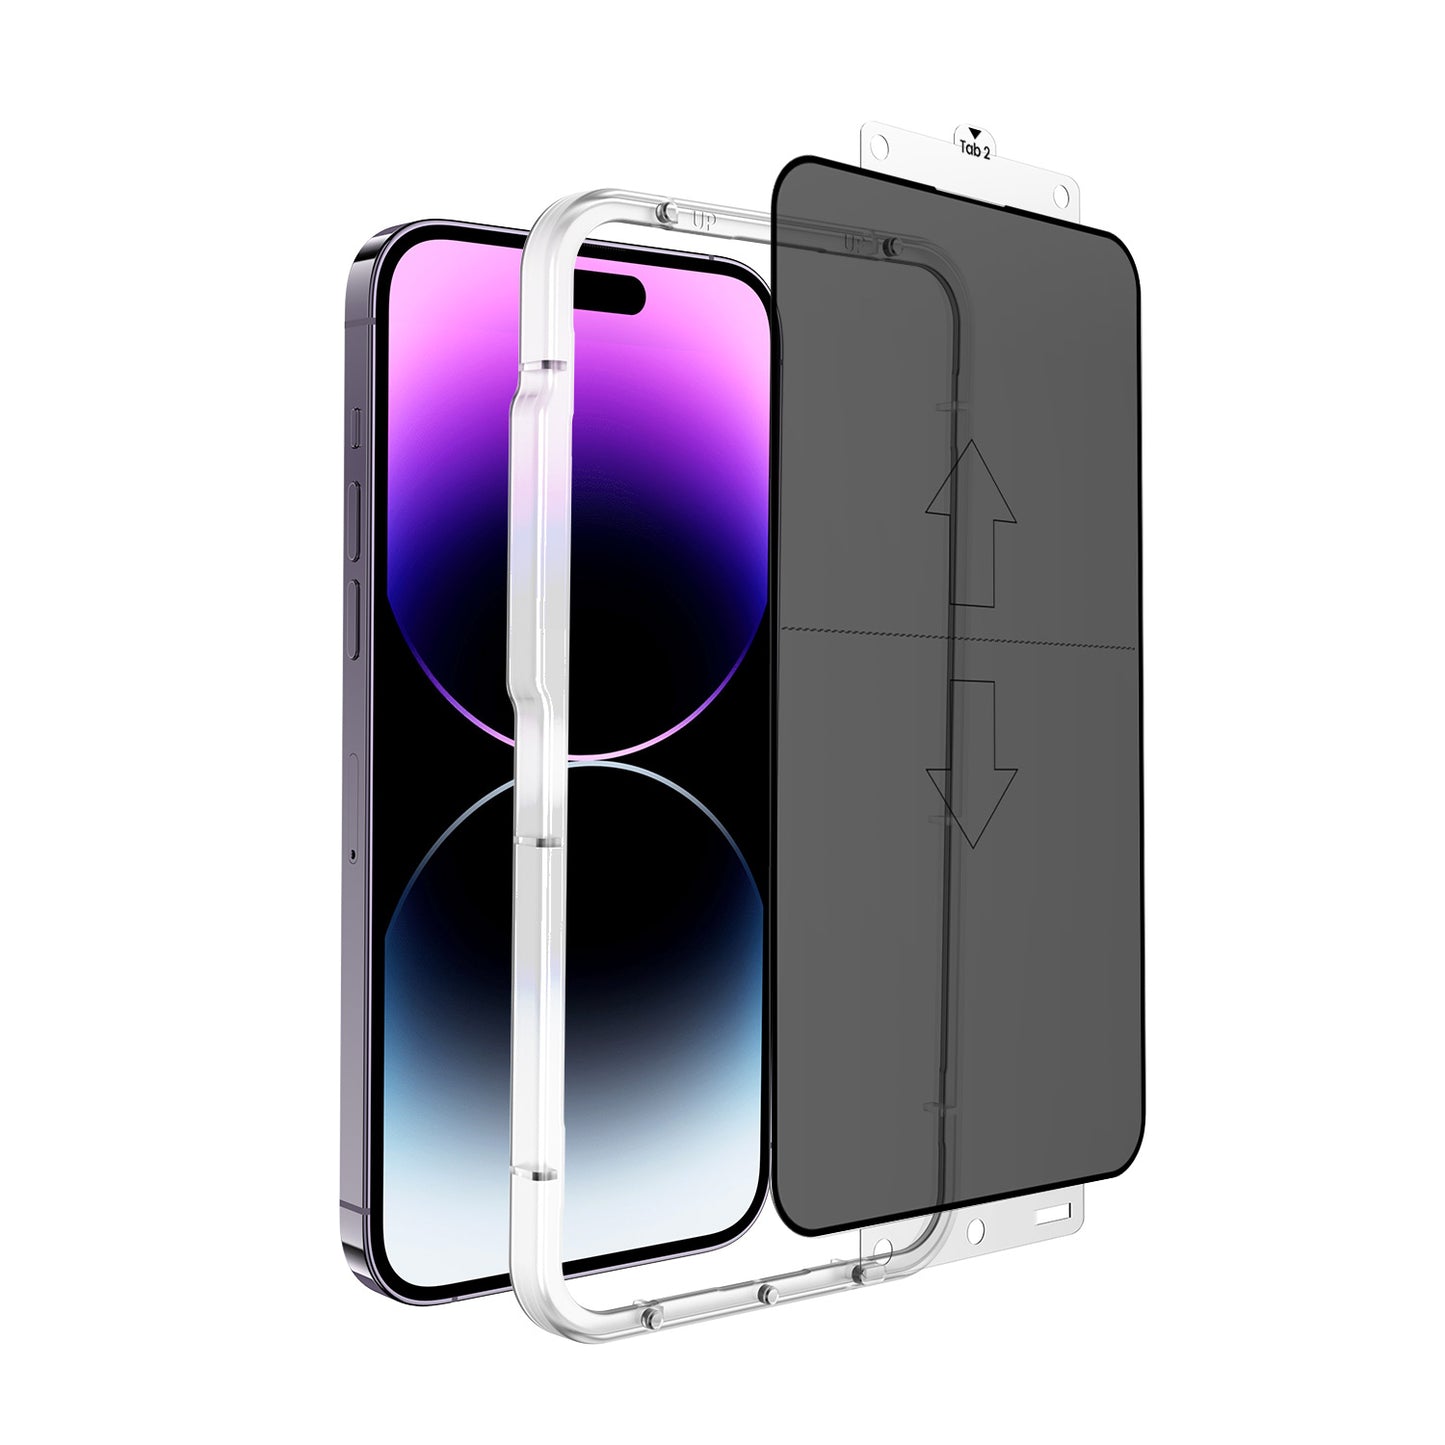 Totem 3D Hammer Proof Screen Protector for iPhone 12